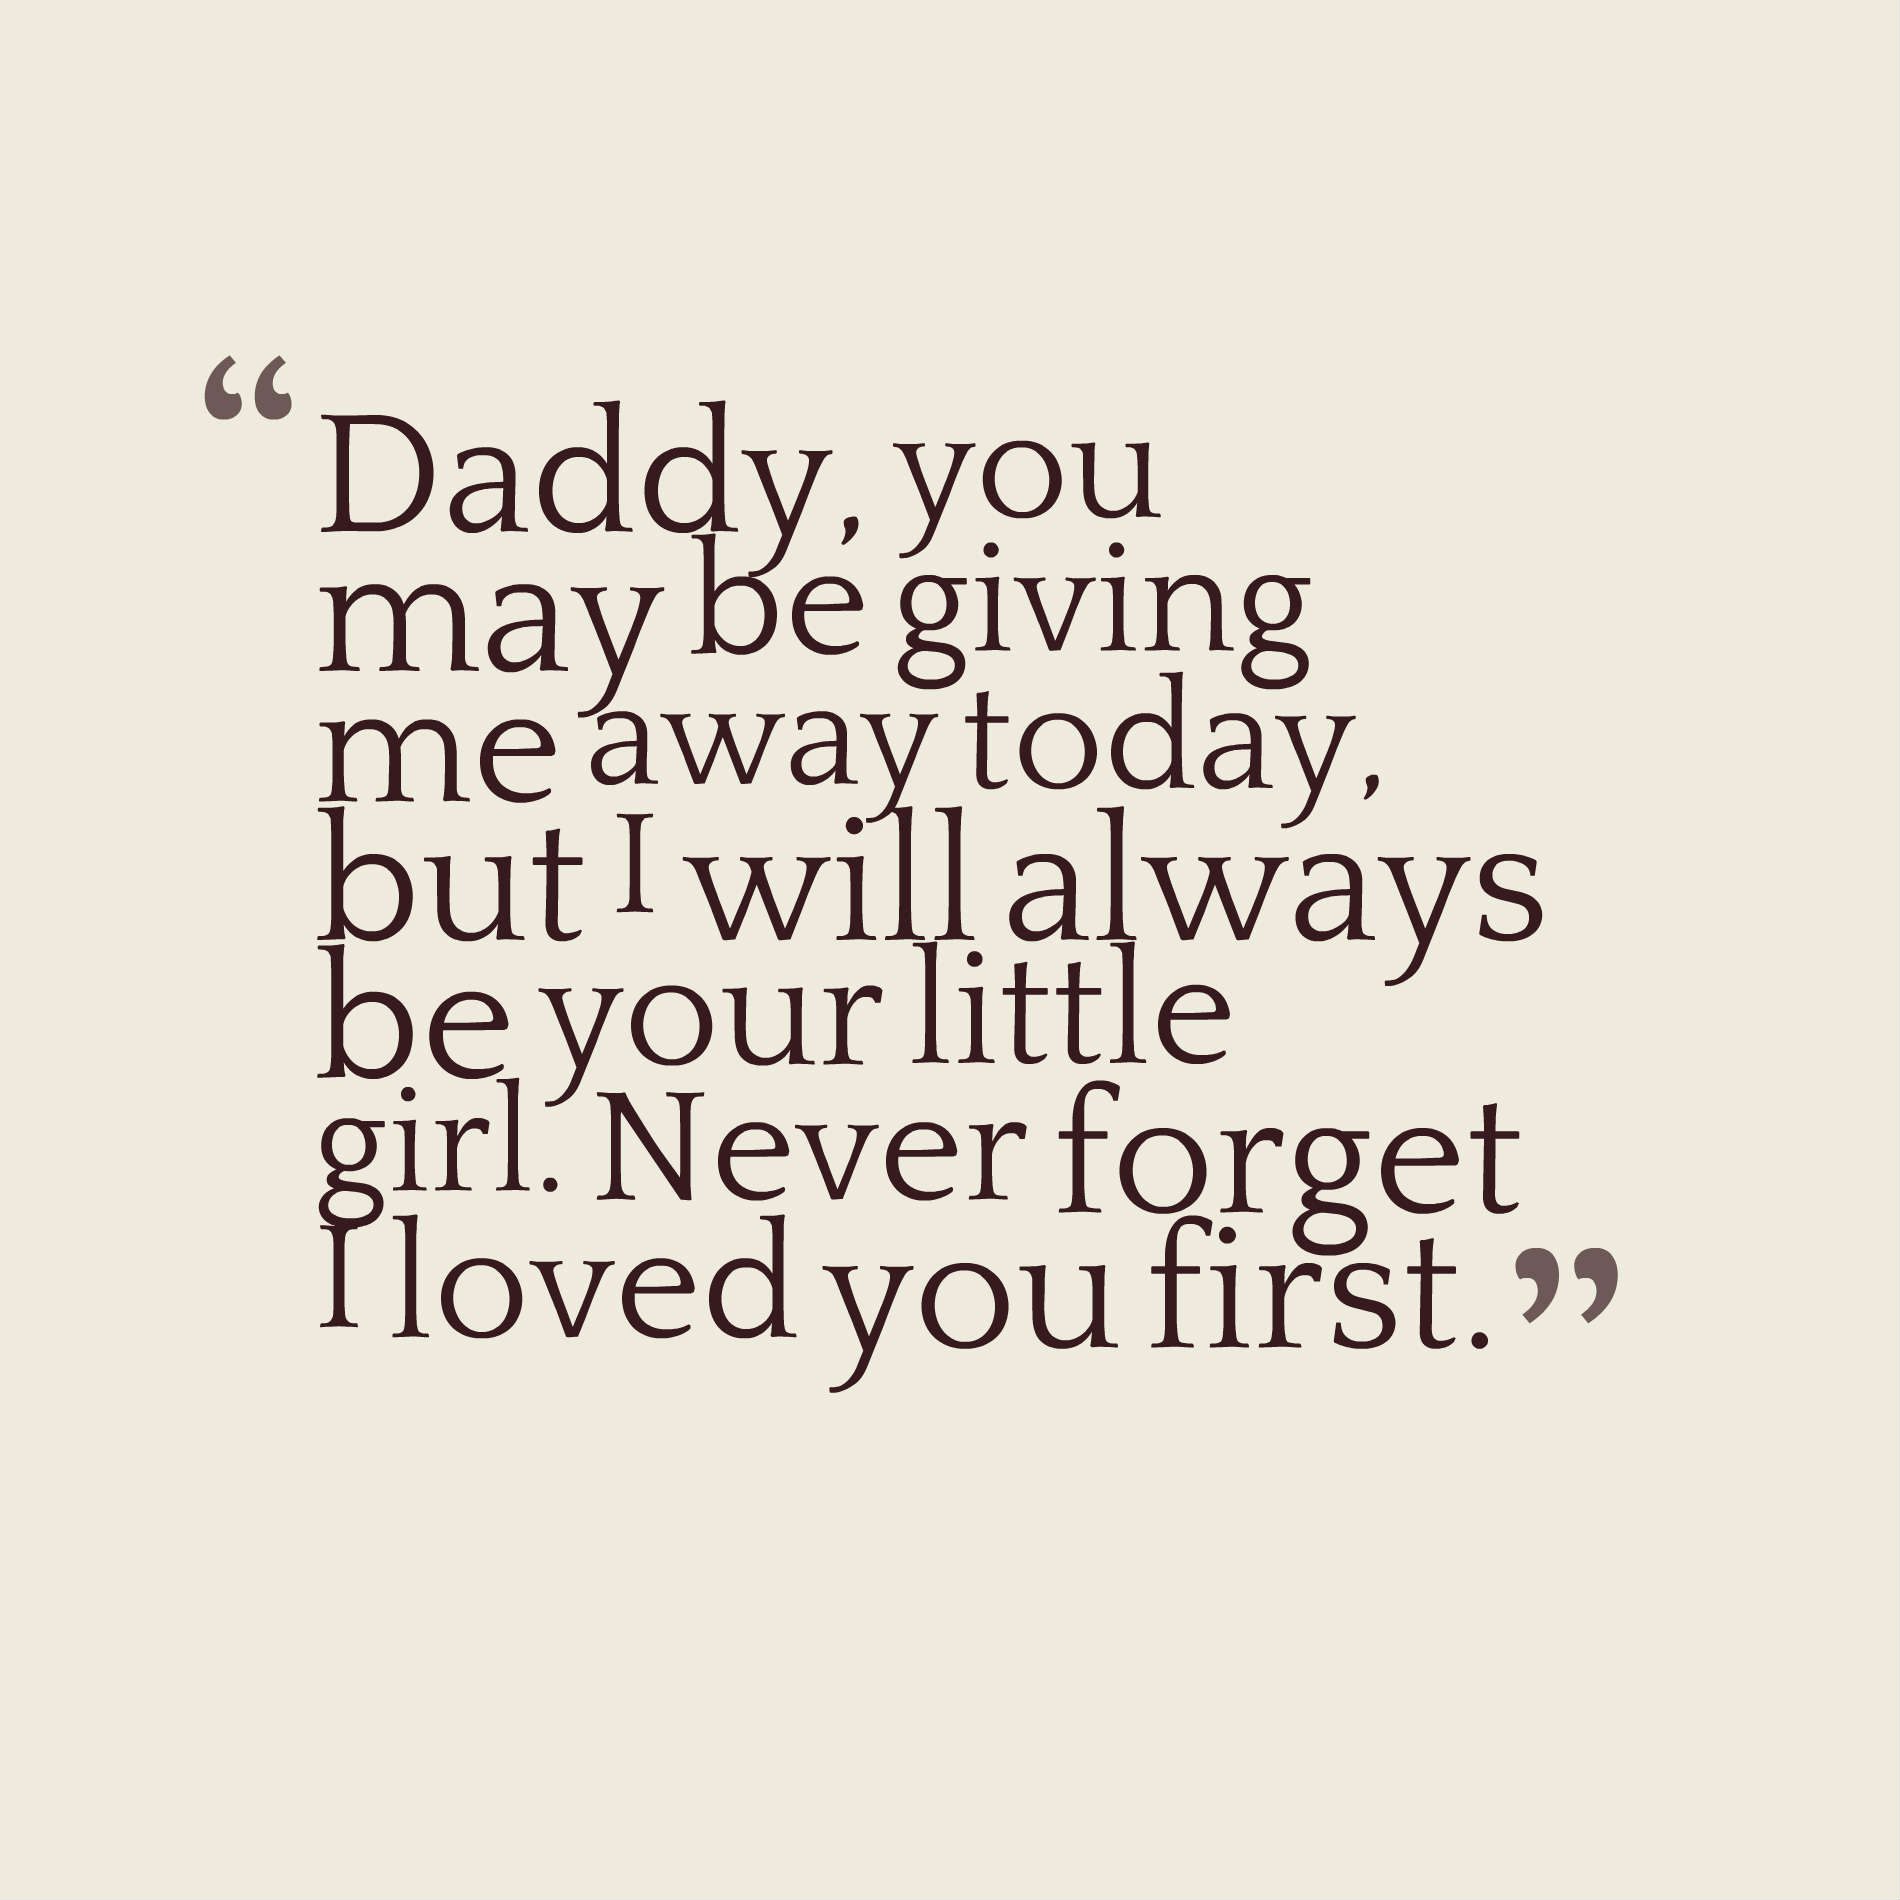 Daddy, you may be giving me away today, but I will always be your little girl. Never forget I loved you first.